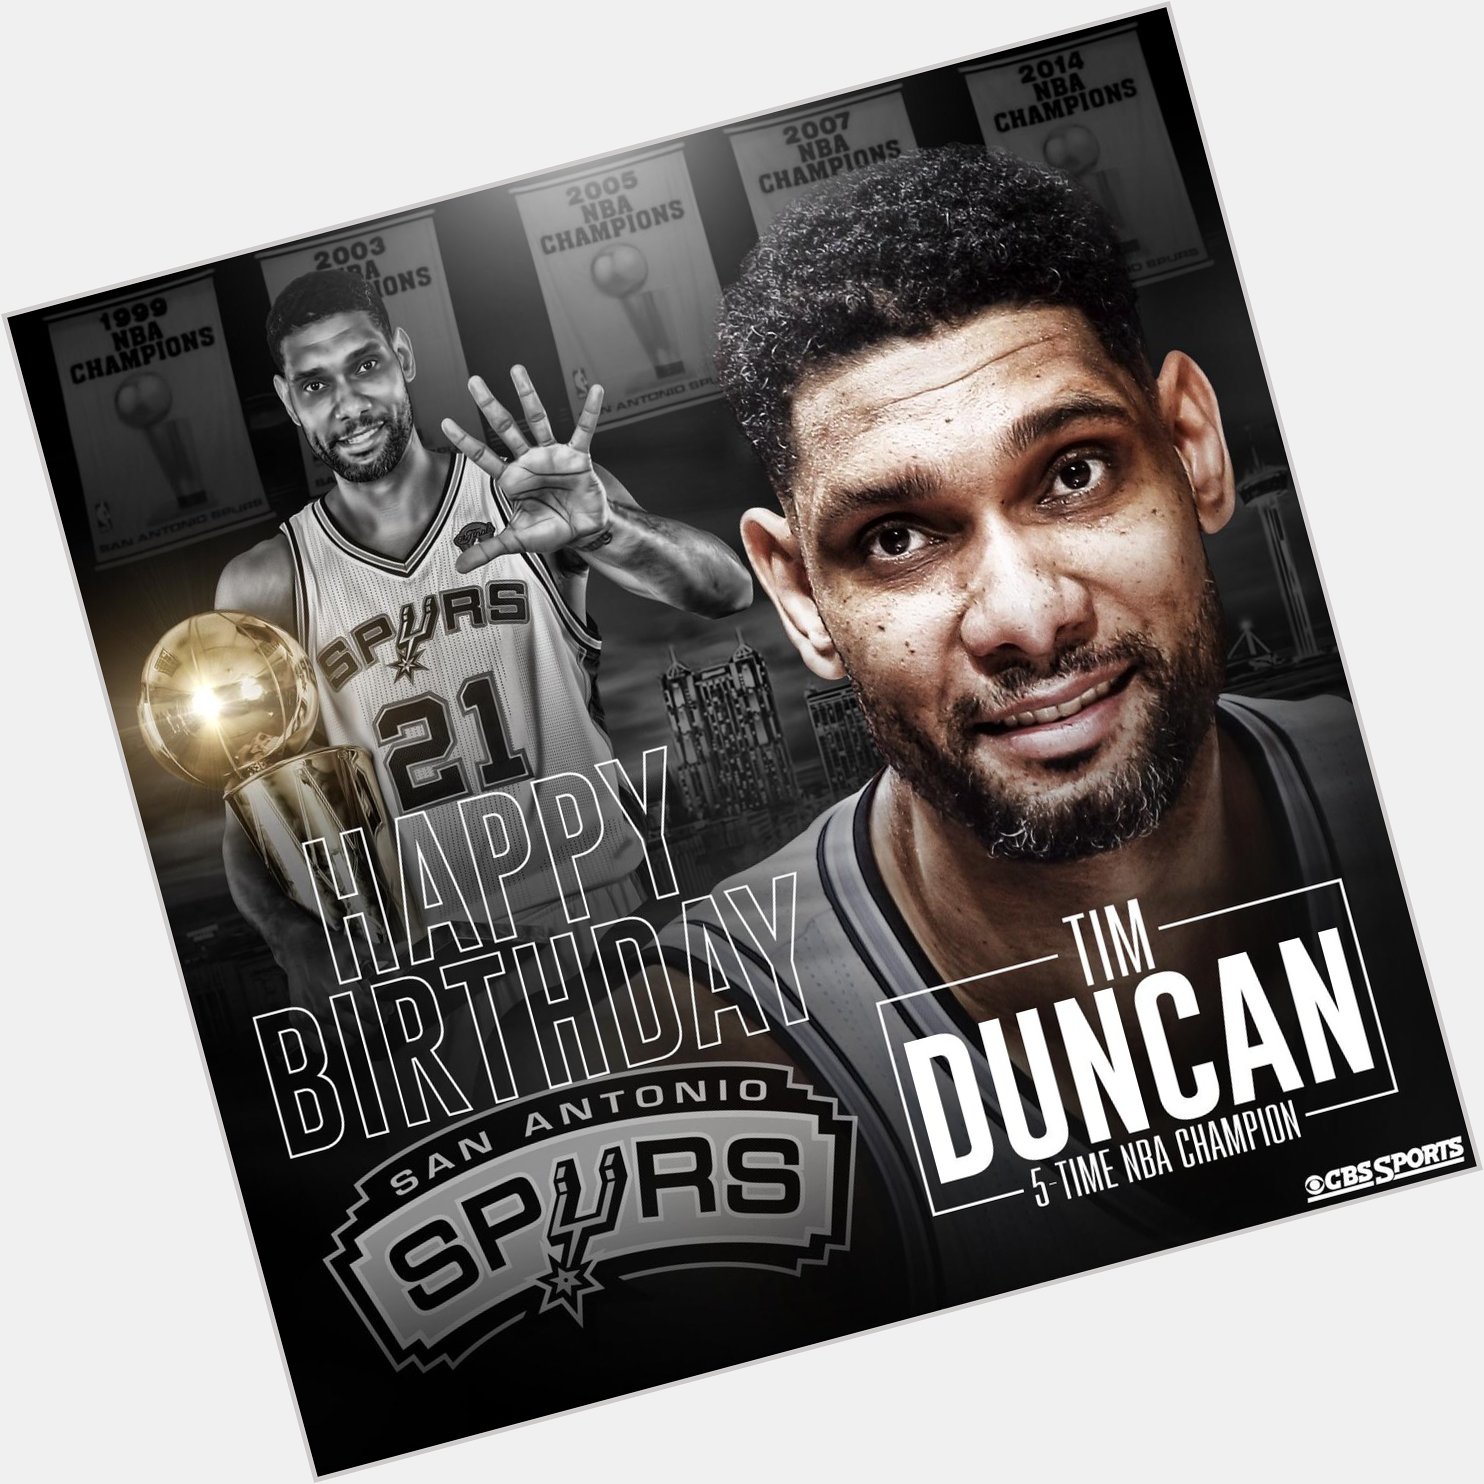 We all know Tim Duncan is ageless, but in human years he would be 39 today.

Happy birthday to the legend. 